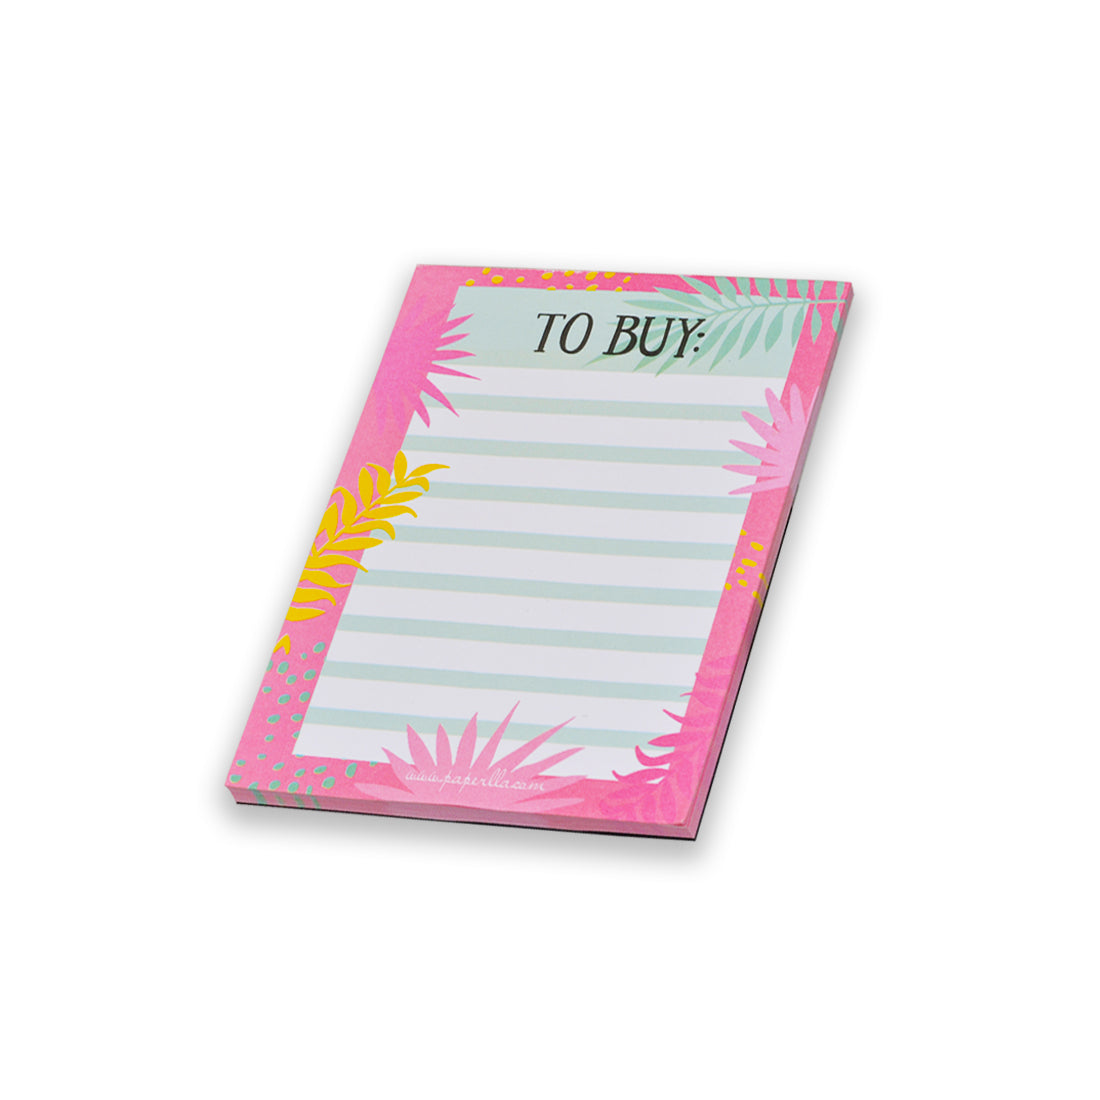 NOTES DAILY JOURNAL PLANNER, TO DO LIST NOTEPADS FOR WRITING NOTES CUTE OFFICE STATIONERY GIFT FOR OFFICE HOME WORK, SET OF 8